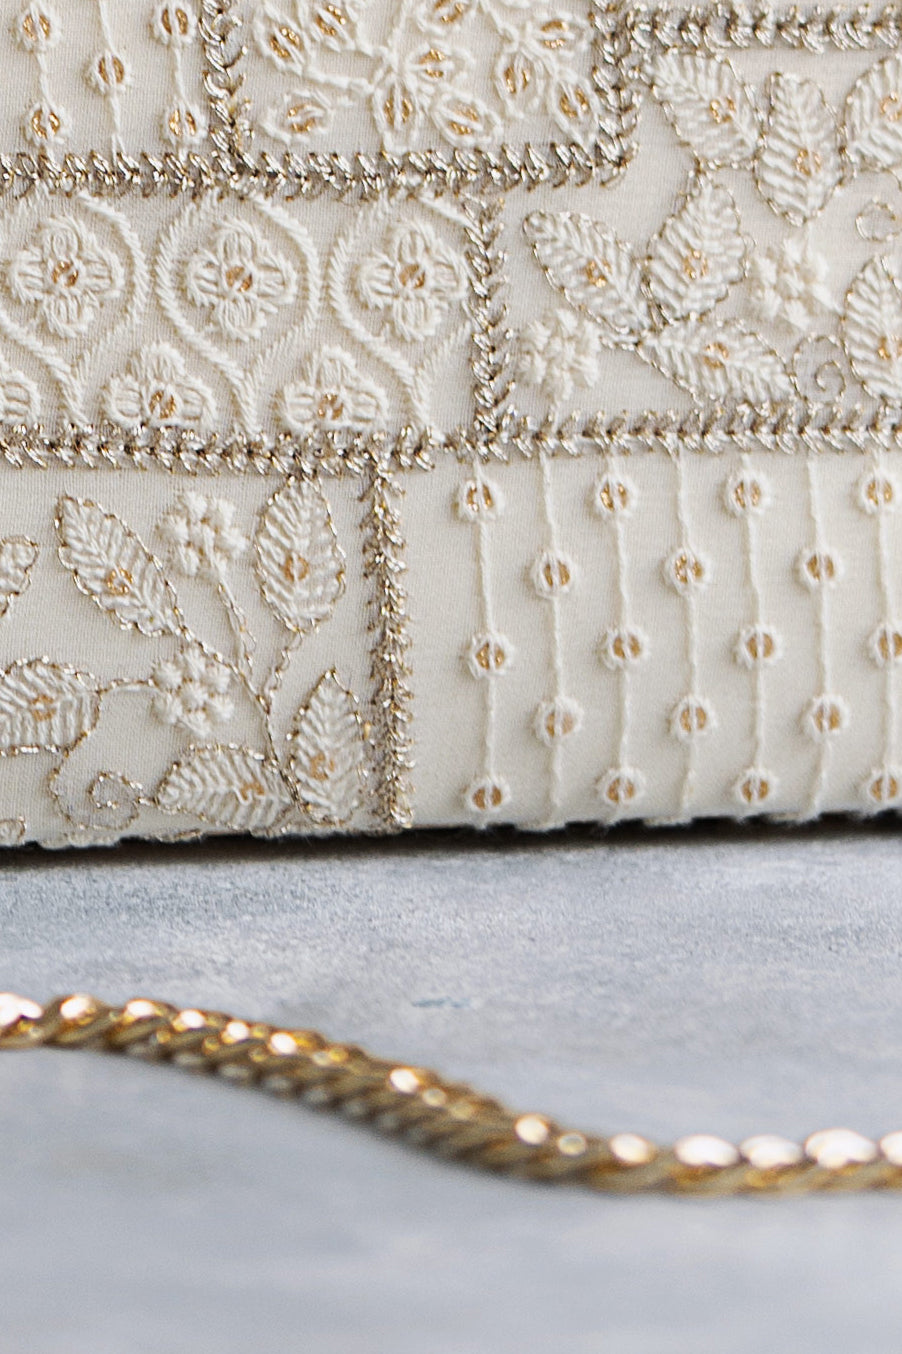 Mosaic Luxe Embroidered Clutch White